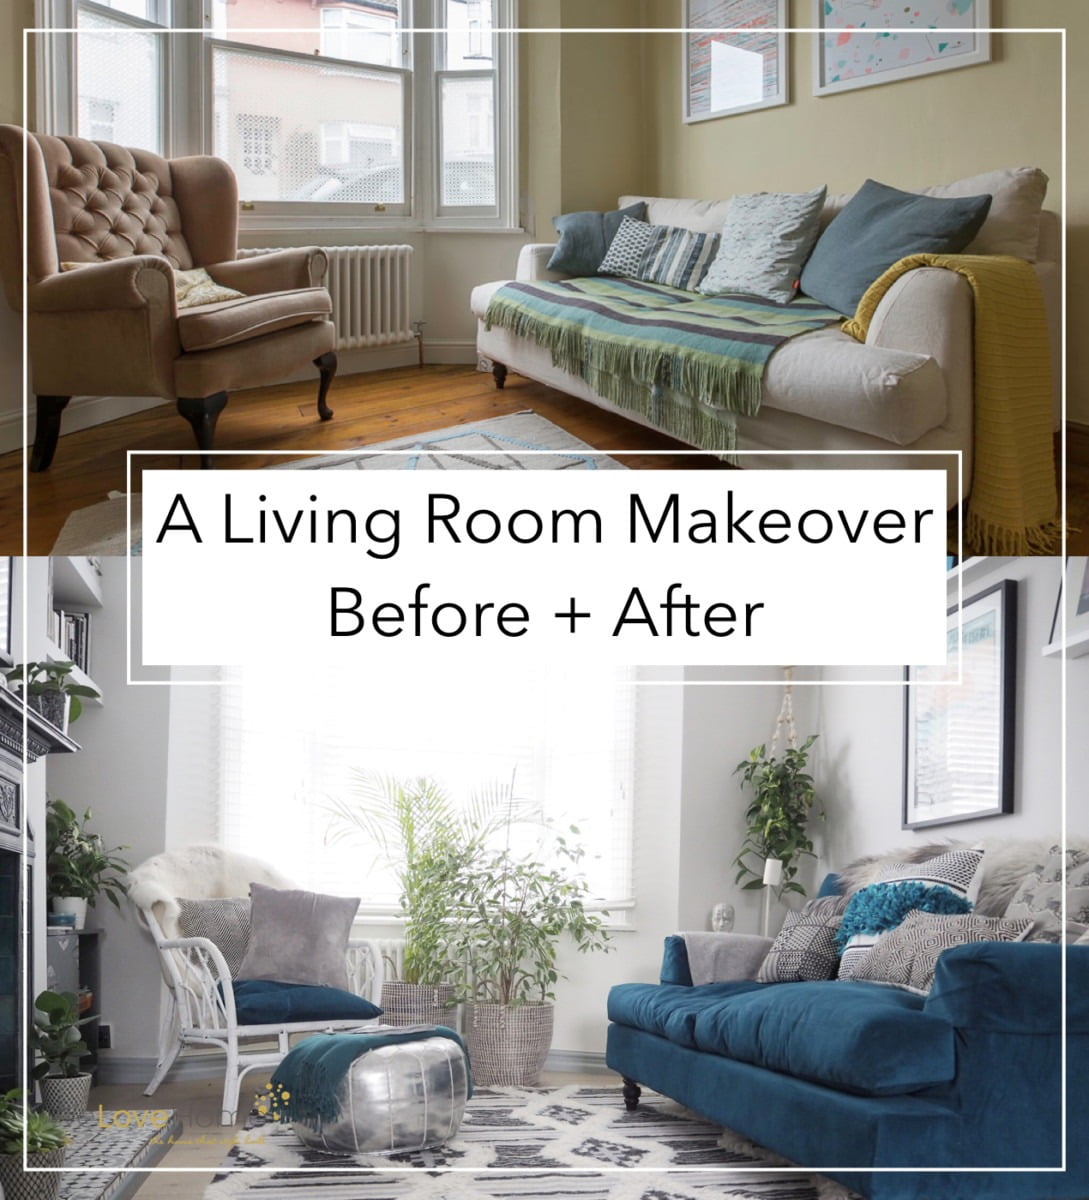 A budget Living Room makeover with lots of before and after shots - with a boho vibes by Maxine Brady from WeLoveHomeBlog